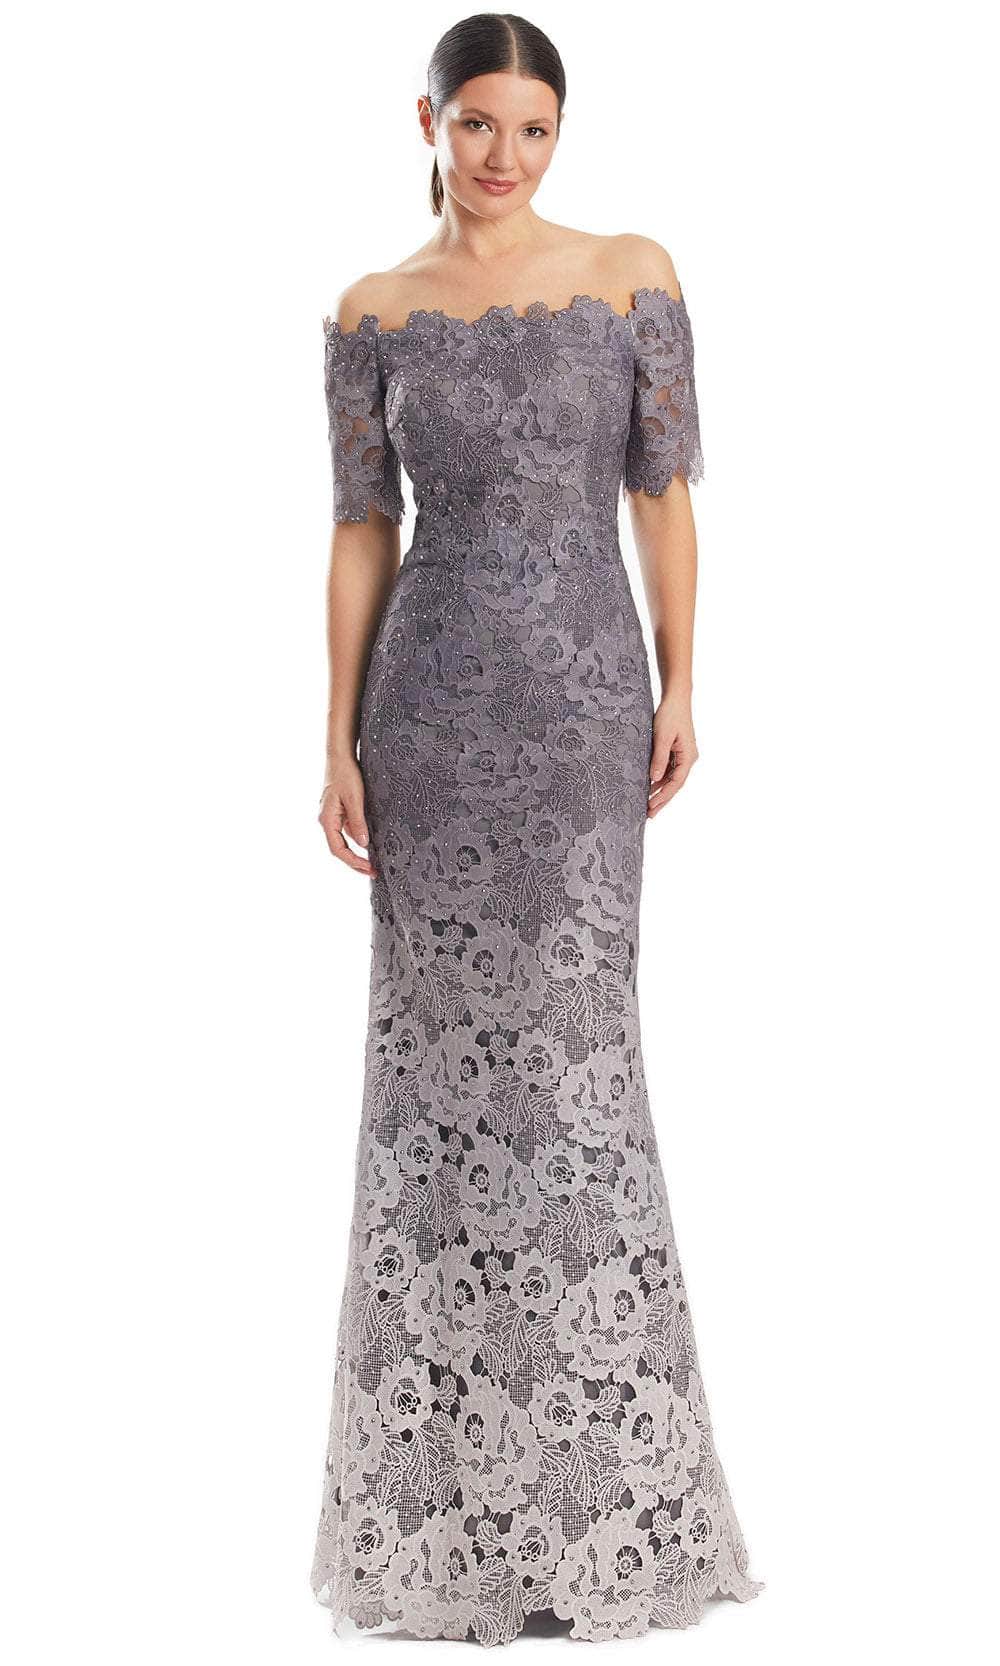 Image of Alexander by Daymor 1976S24 - Short Sleeves Lace Applique Prom Dress